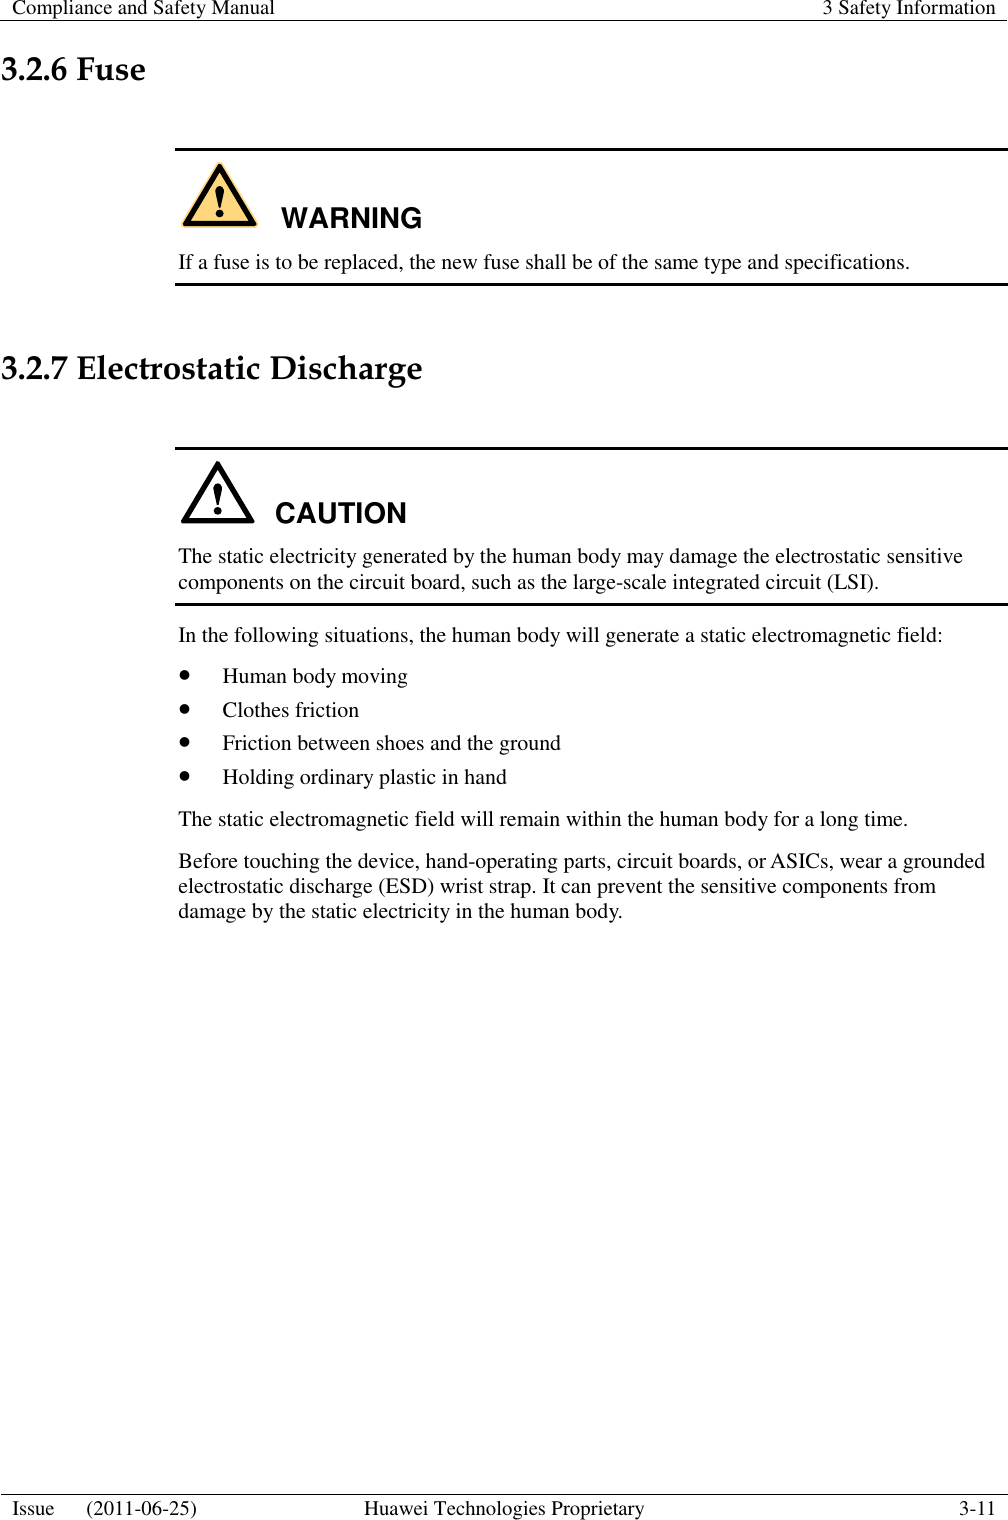 Compliance and Safety Manual 3 Safety Information  Issue      (2011-06-25) Huawei Technologies Proprietary 3-11  3.2.6 Fuse  WARNING If a fuse is to be replaced, the new fuse shall be of the same type and specifications.  3.2.7 Electrostatic Discharge  CAUTION The static electricity generated by the human body may damage the electrostatic sensitive components on the circuit board, such as the large-scale integrated circuit (LSI). In the following situations, the human body will generate a static electromagnetic field:  Human body moving  Clothes friction  Friction between shoes and the ground  Holding ordinary plastic in hand The static electromagnetic field will remain within the human body for a long time. Before touching the device, hand-operating parts, circuit boards, or ASICs, wear a grounded electrostatic discharge (ESD) wrist strap. It can prevent the sensitive components from damage by the static electricity in the human body. 